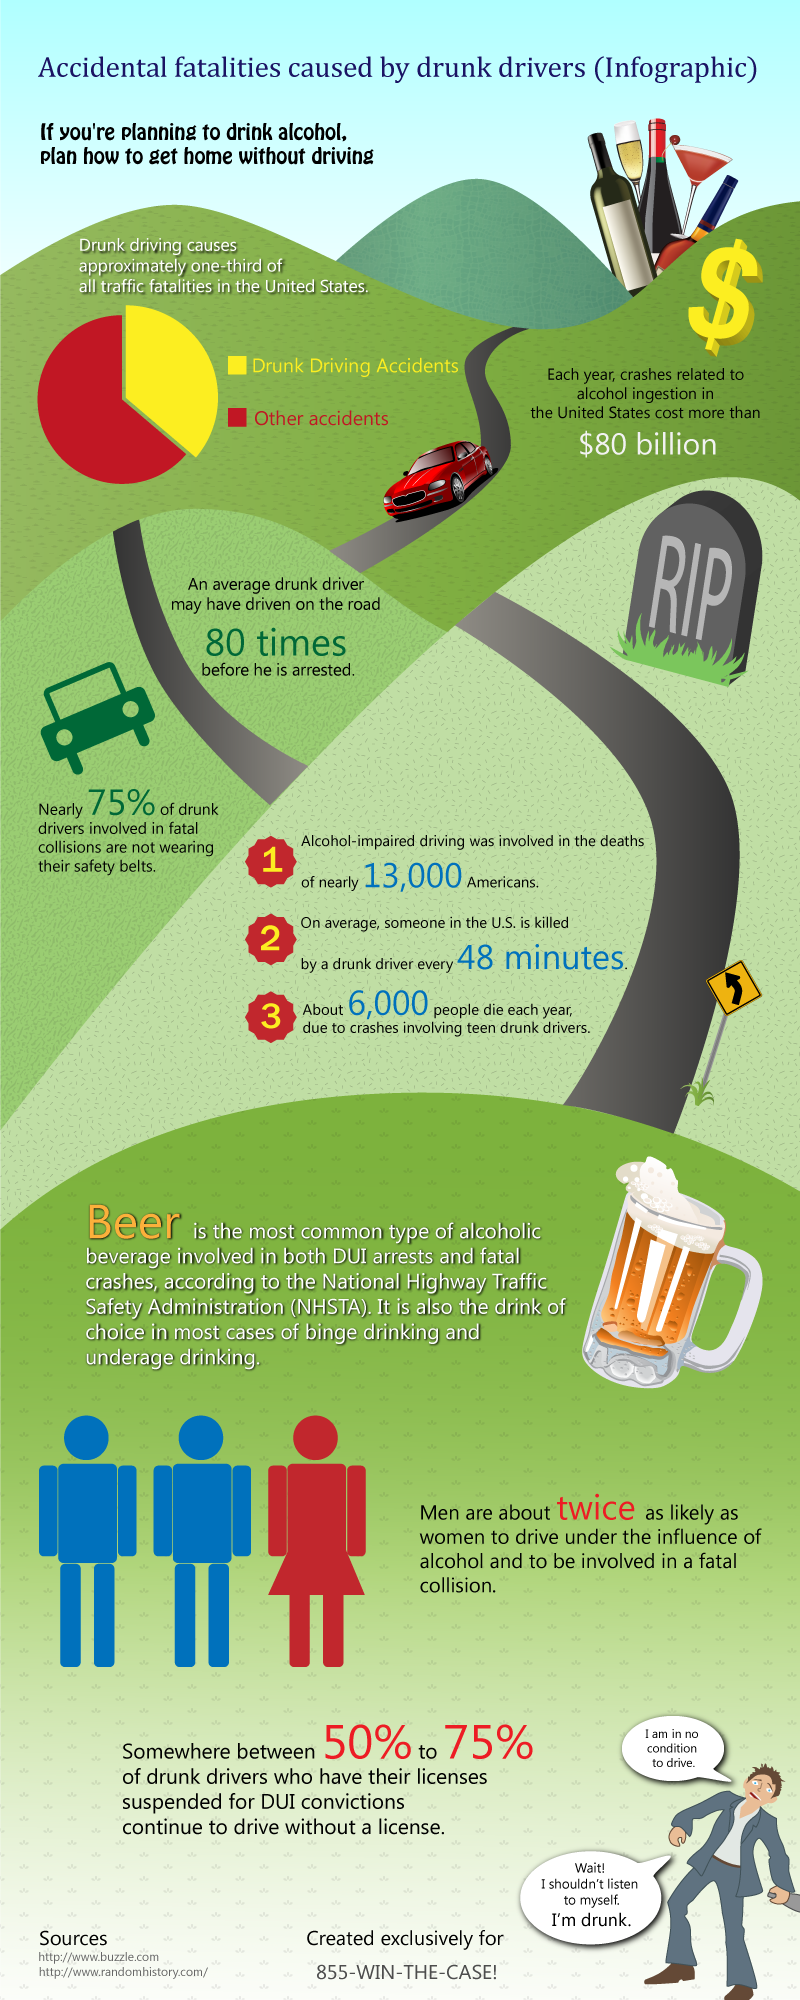 Accidental fatalities caused by drunk drivers | Visual.ly